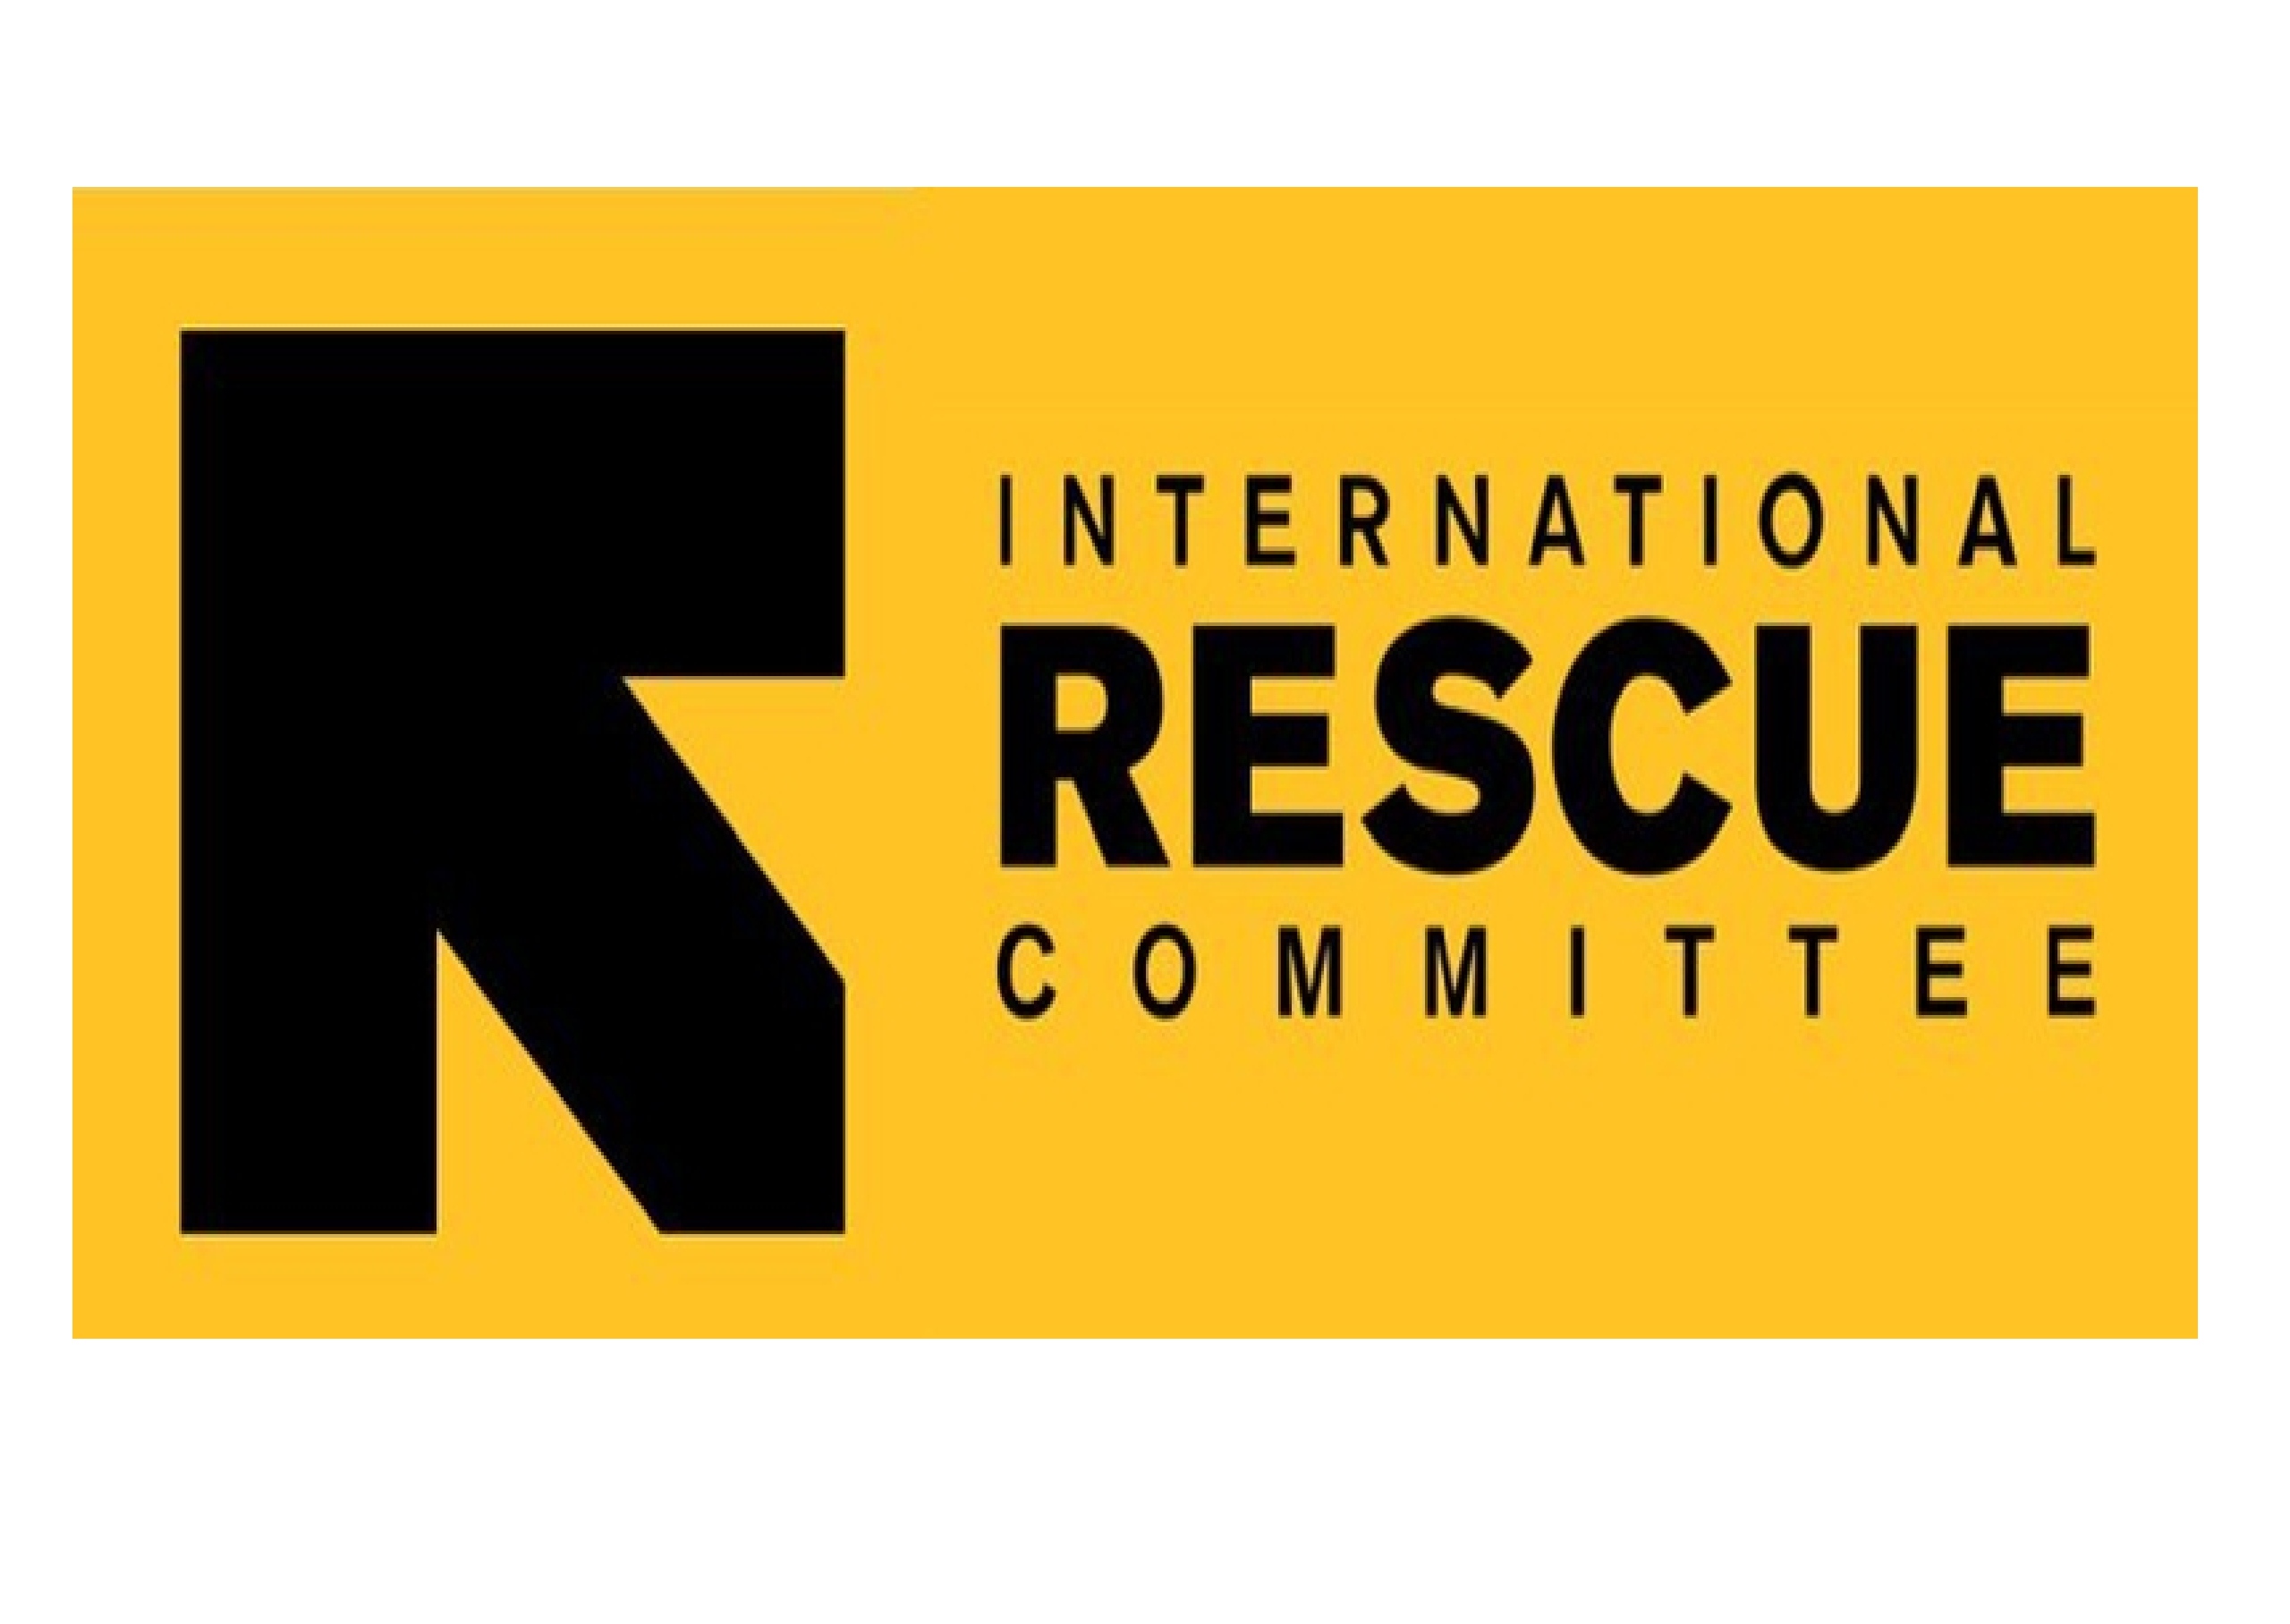 The International Rescue Committee 